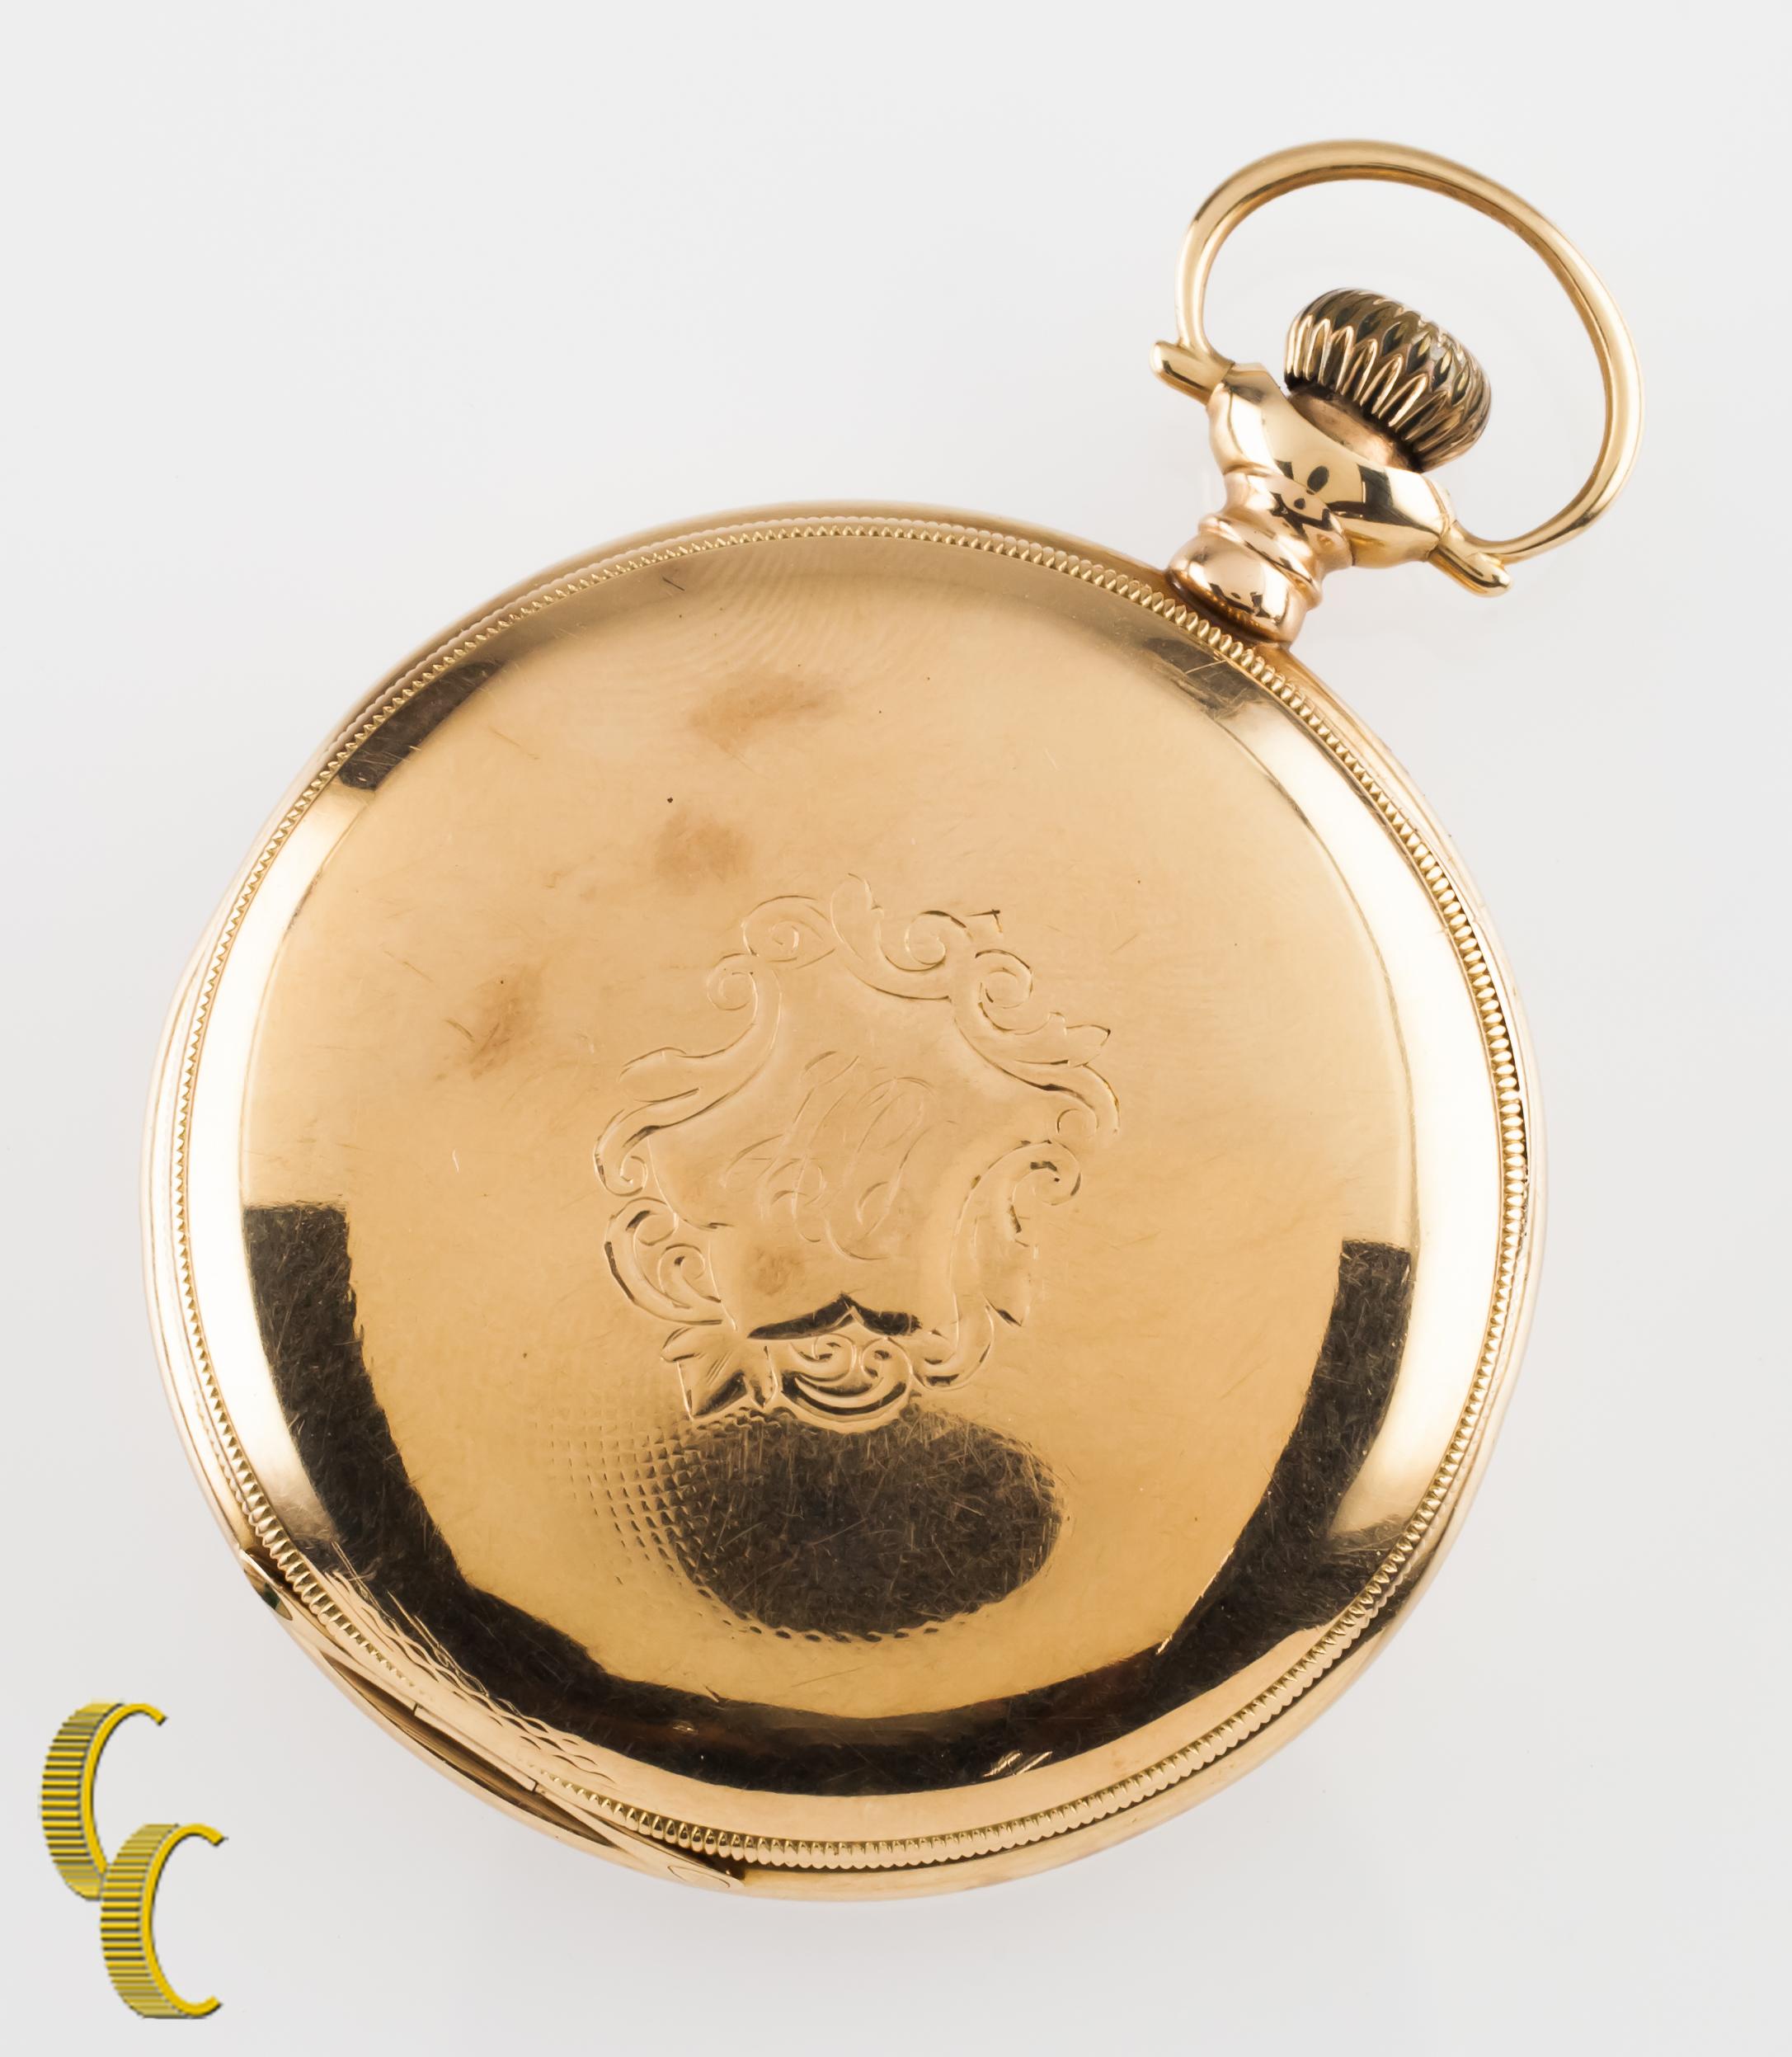 Beautiful Antique Elgin Pocket Watch w/ White Dial Including Cobalt Blue Hands & Dedicated Second Dial
14k Yellow Gold Case w/ Intricate Hand-Etched Guilloche Design on Case
Black Arabic Numerals
Case Serial #479694
15-Jewel Elgin Movement Serial